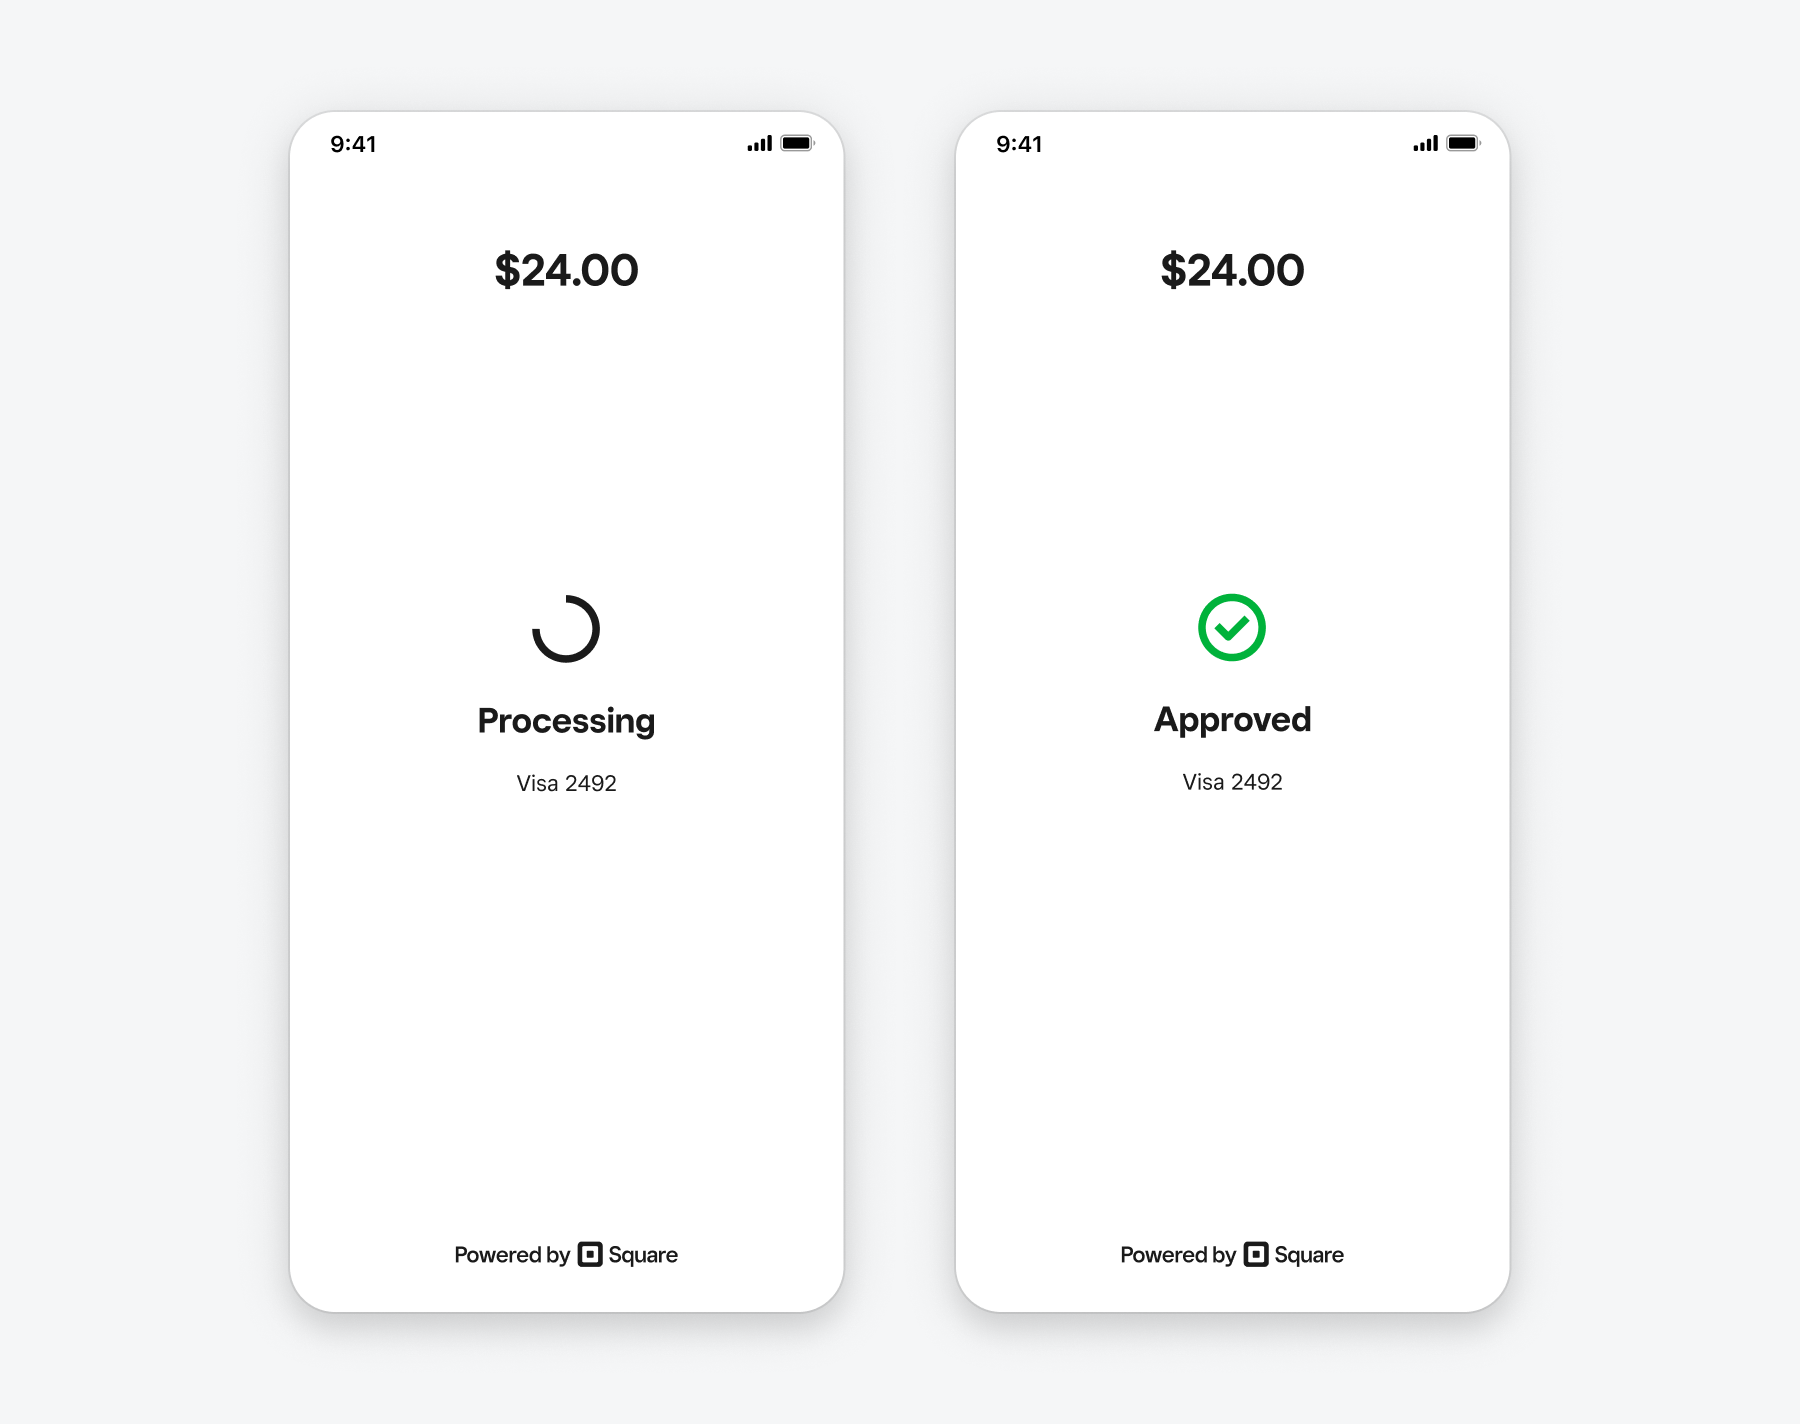 A graphic showing two payment screens in the Mobile Payments SDK, showing a 24 dollar payment going through "Processing" and "Approved" status 